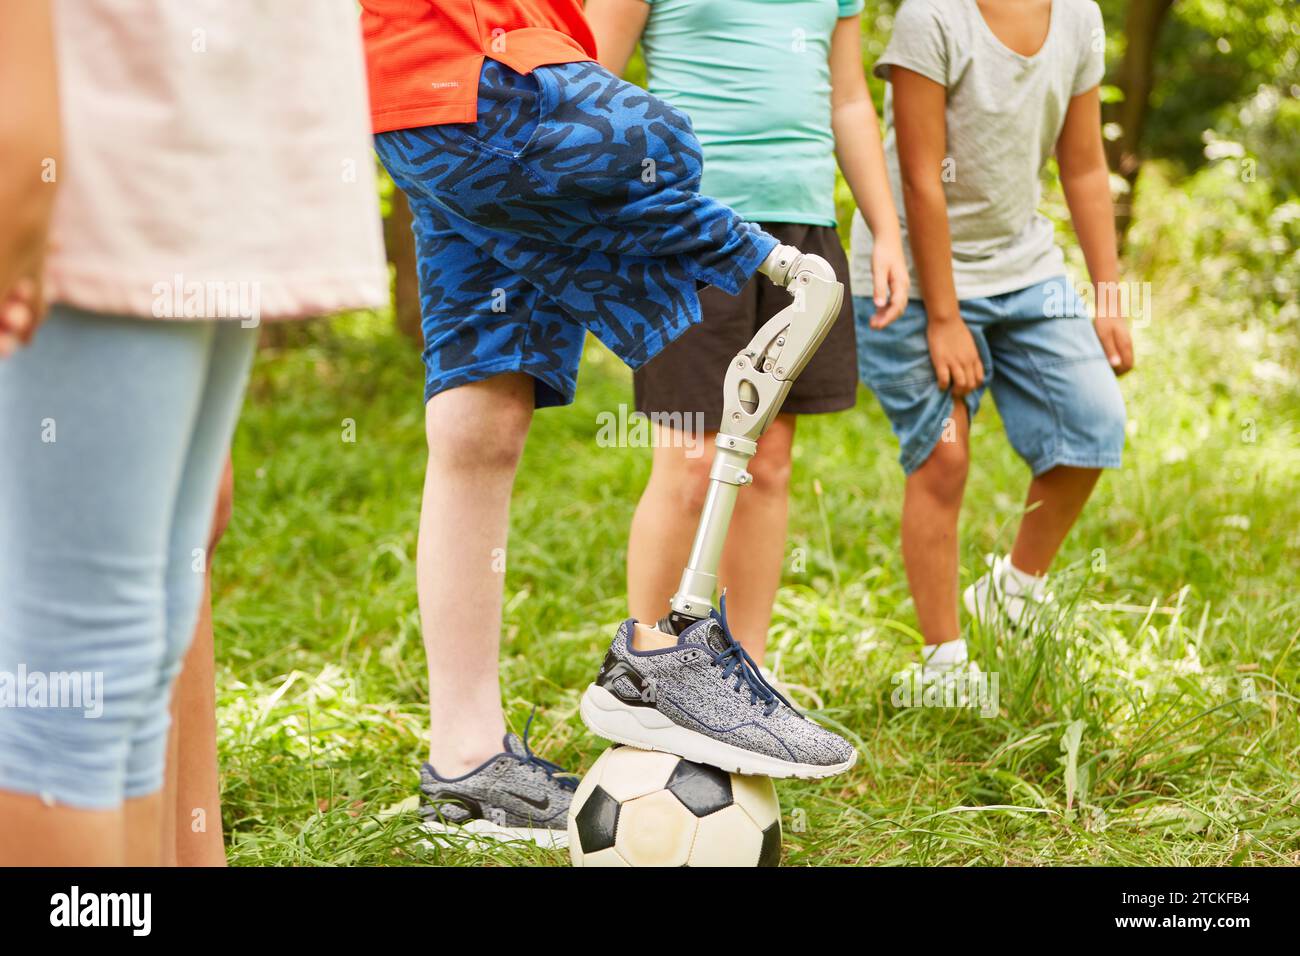 Group of children playing with soccer ball with boy with prosthetic leg in summer Stock Photo